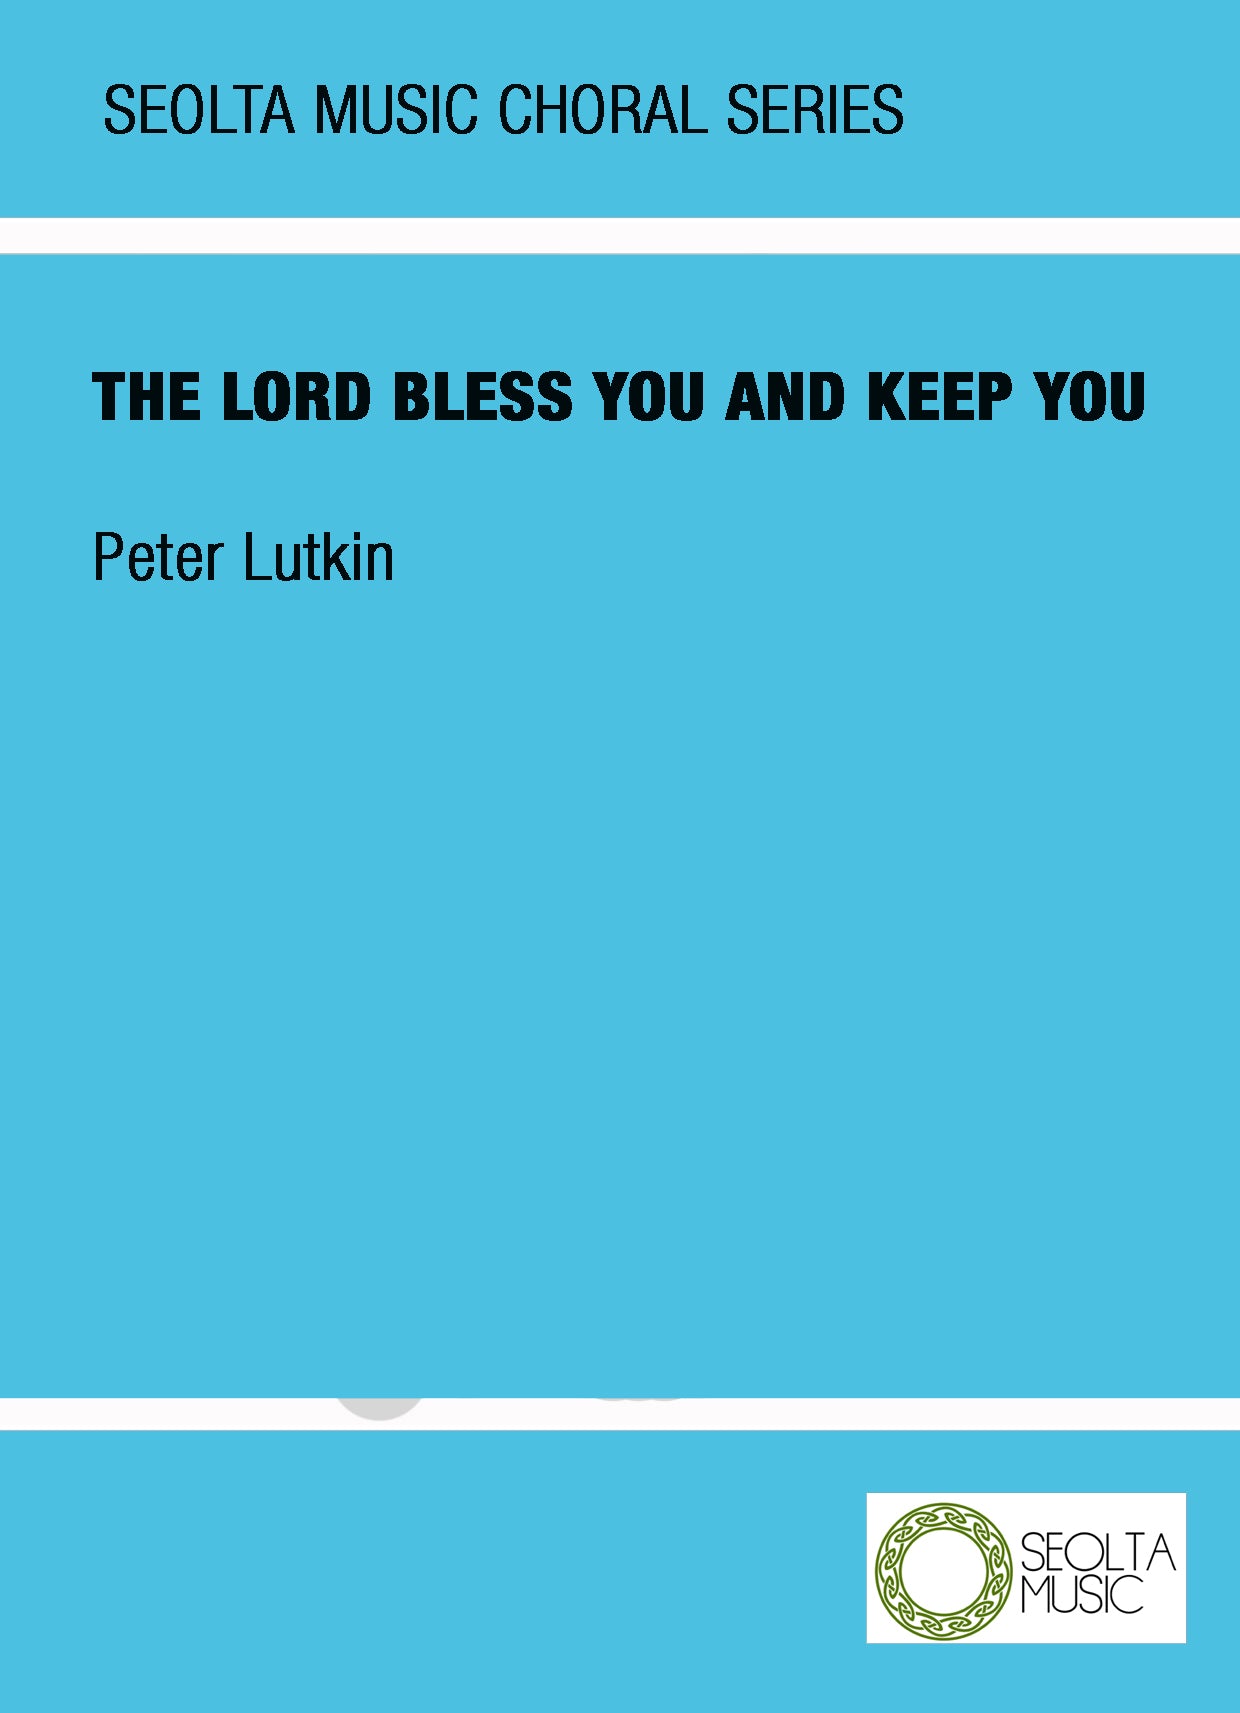 the-lord-bless-you-and-keep-you-lutkin-sheet-music